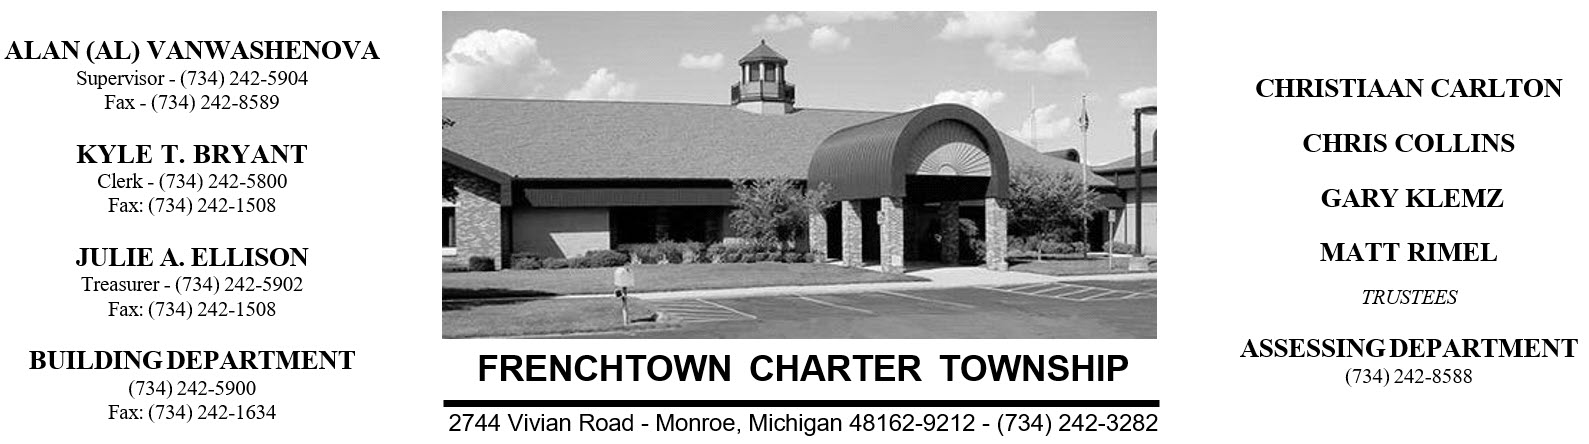 Frenchtown Charter Township Letterhead